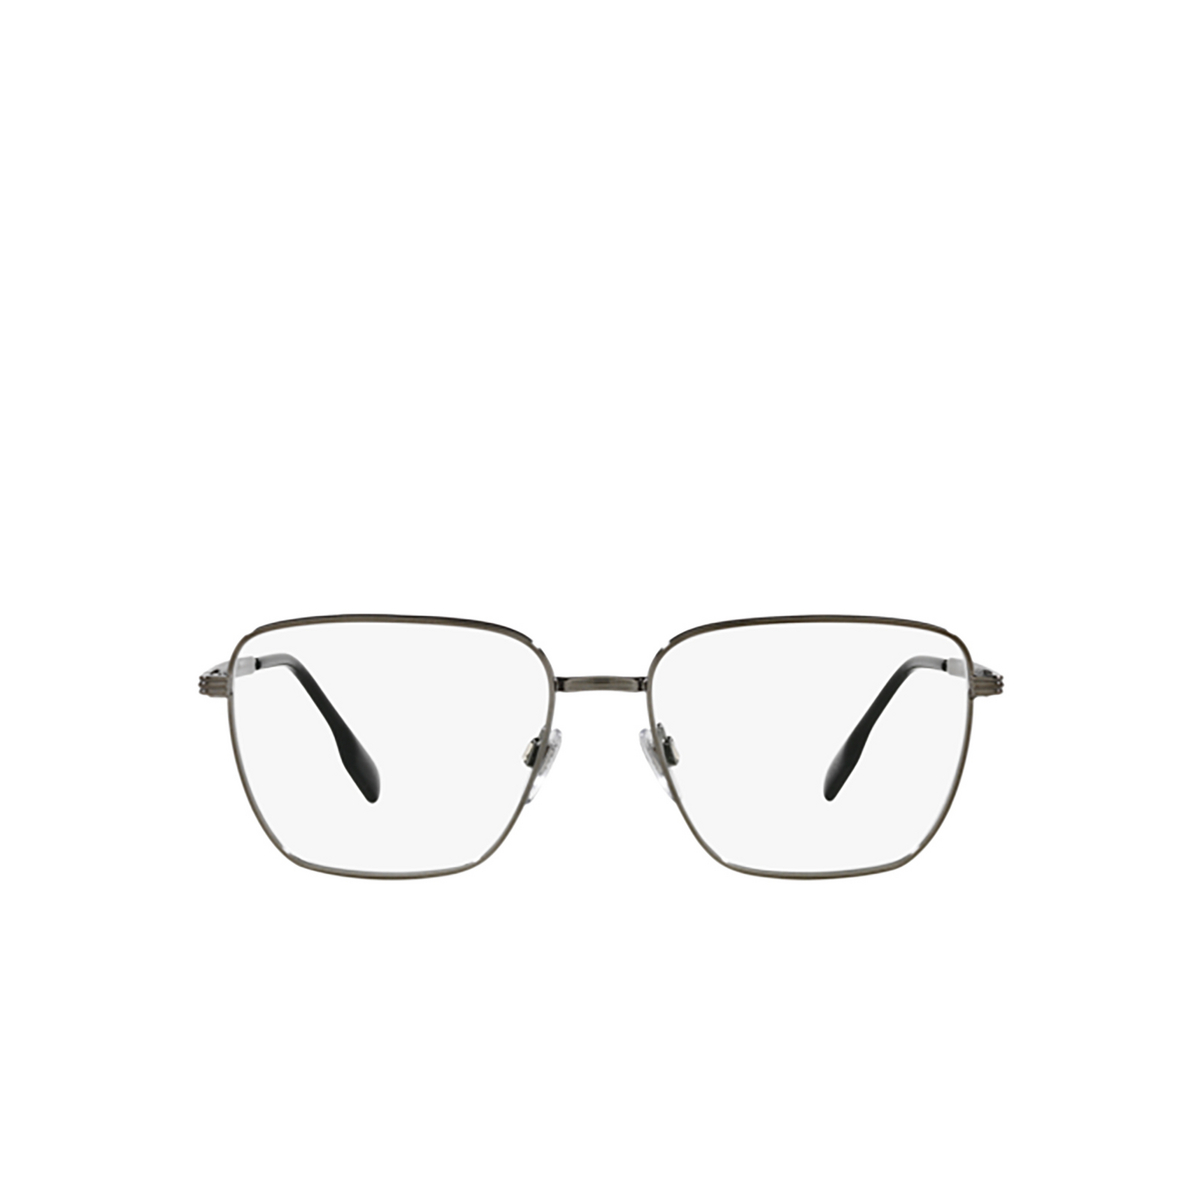 Burberry BOOTH Eyeglasses 1144 Ruthenium - front view